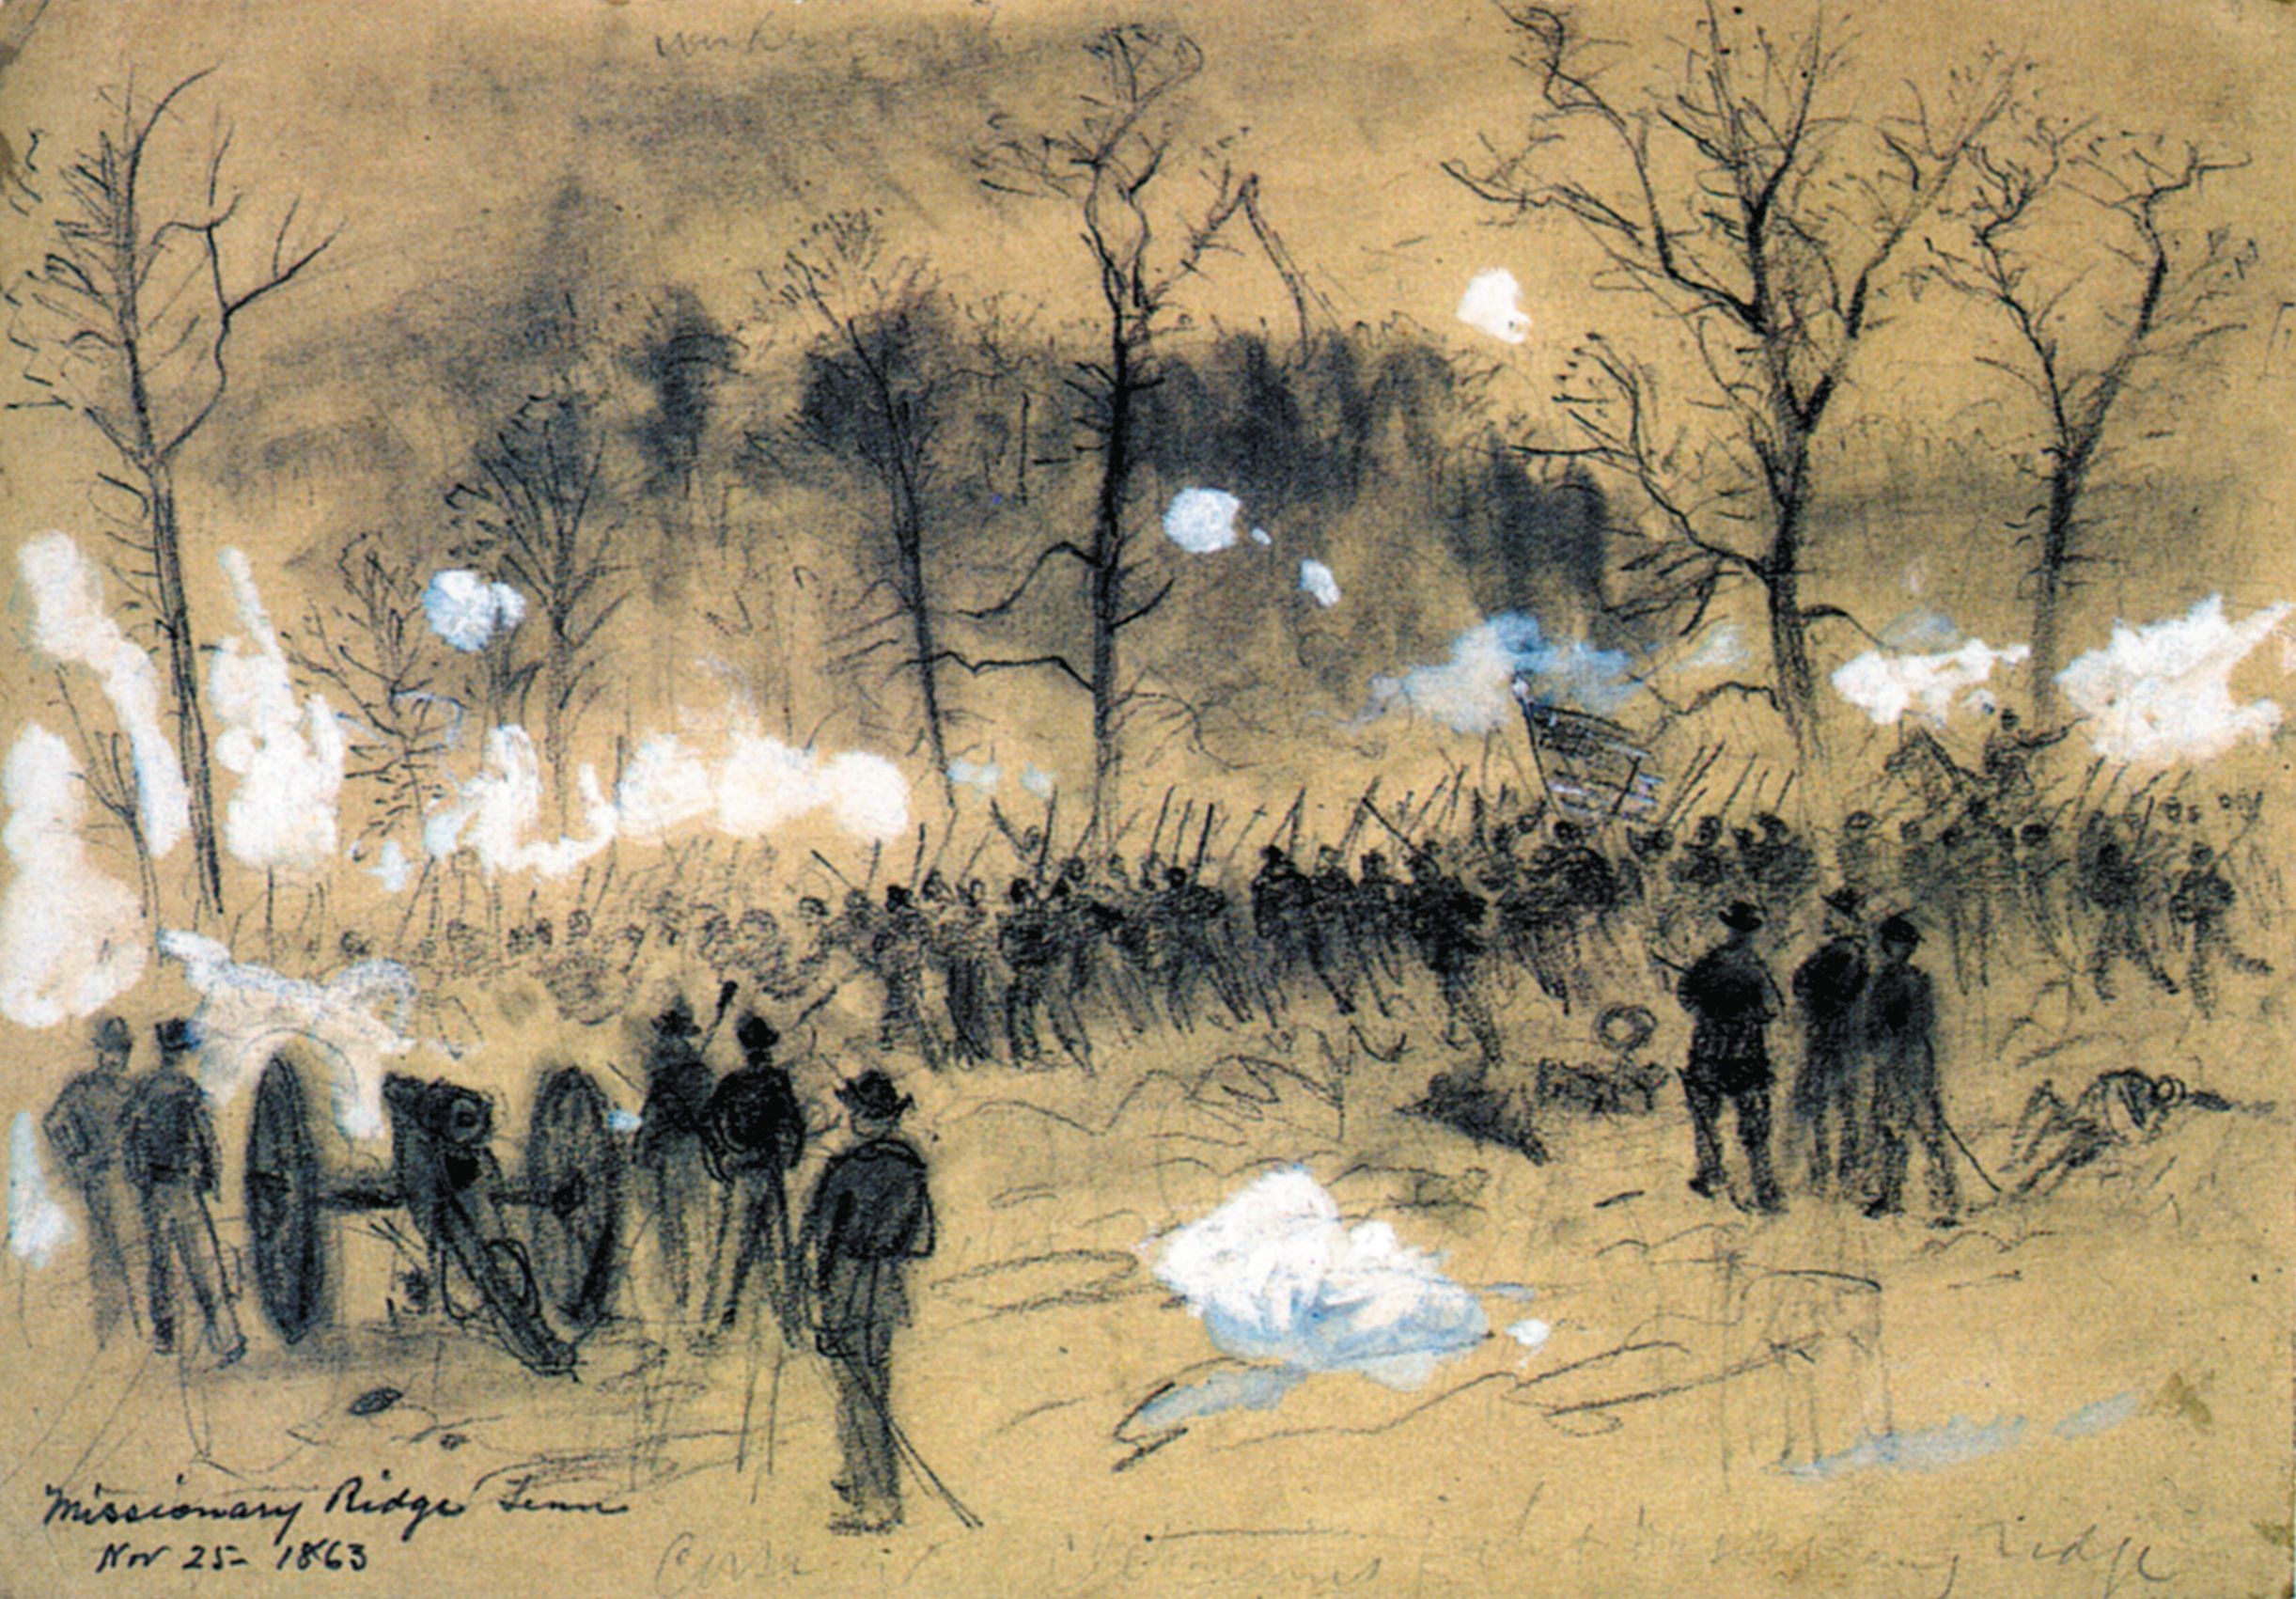 Battlefield artist Alfred R. Ward depicts Brig. Gen. John Corse’s ill-fated attack on the Confederate right at Tunnel Hill on November 25. 